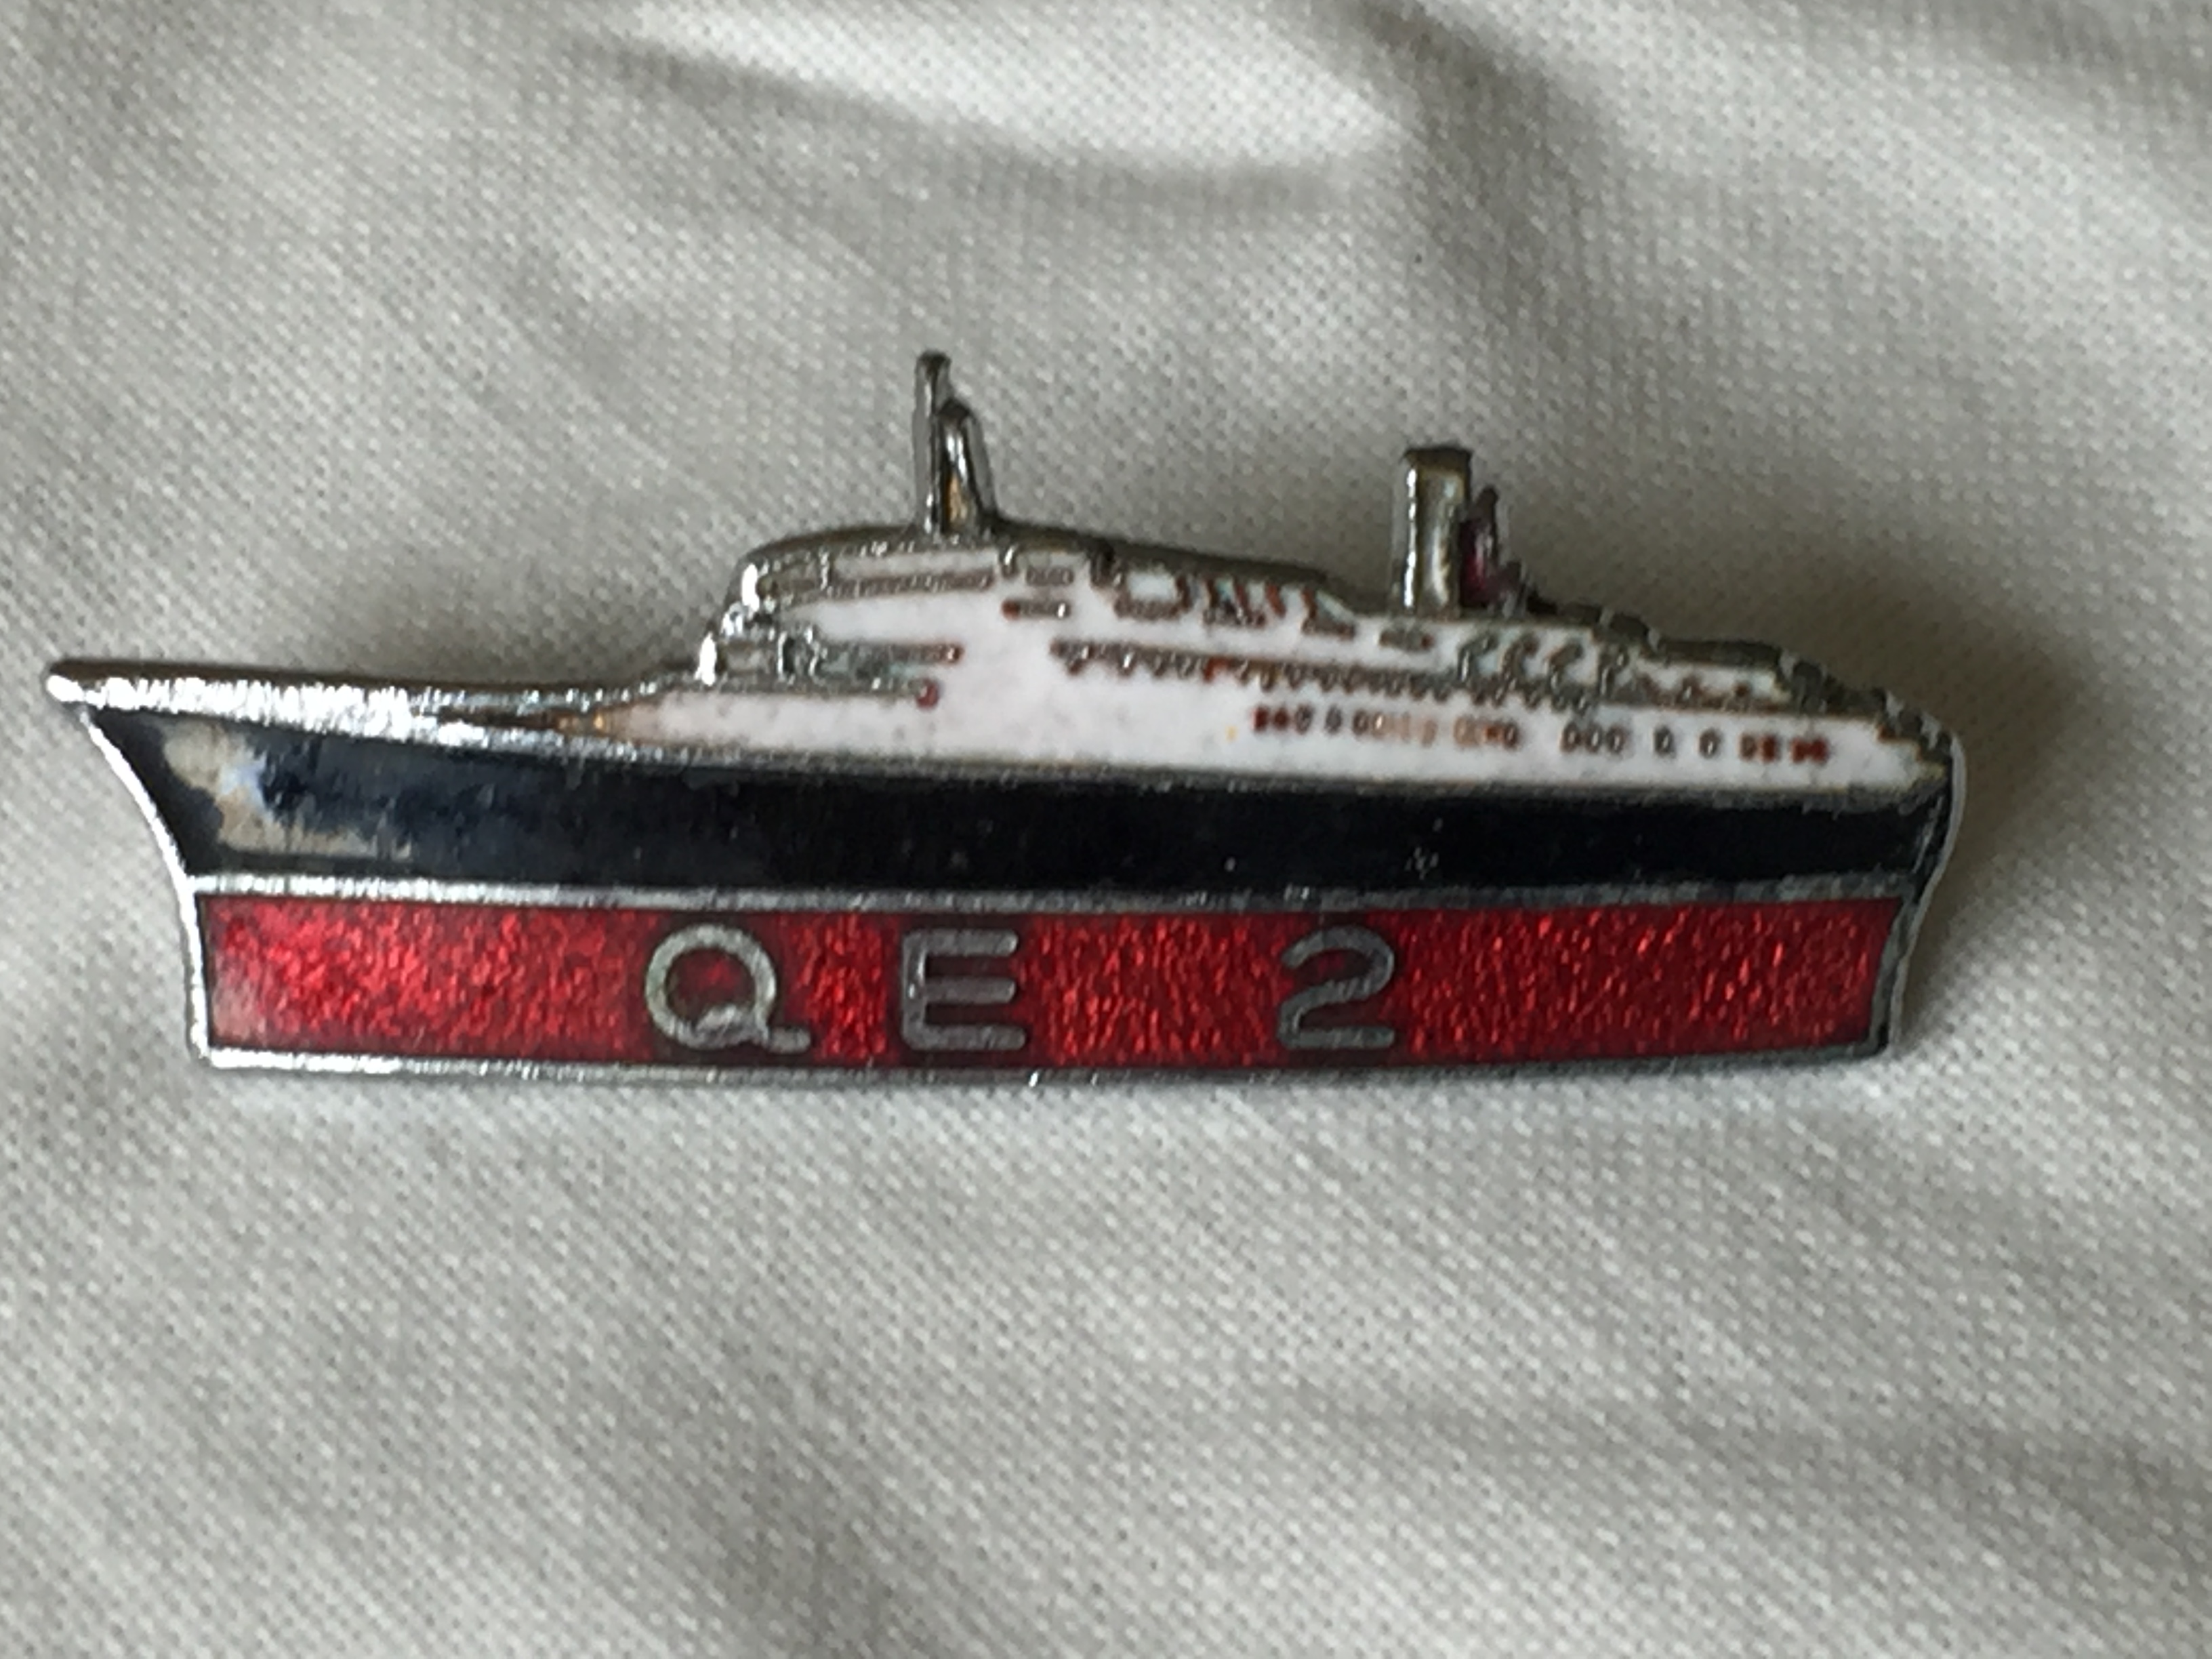 SHIPE SHAPE LAPEL PIN FROM THE CUNARD LINE VESSEL THE QE2